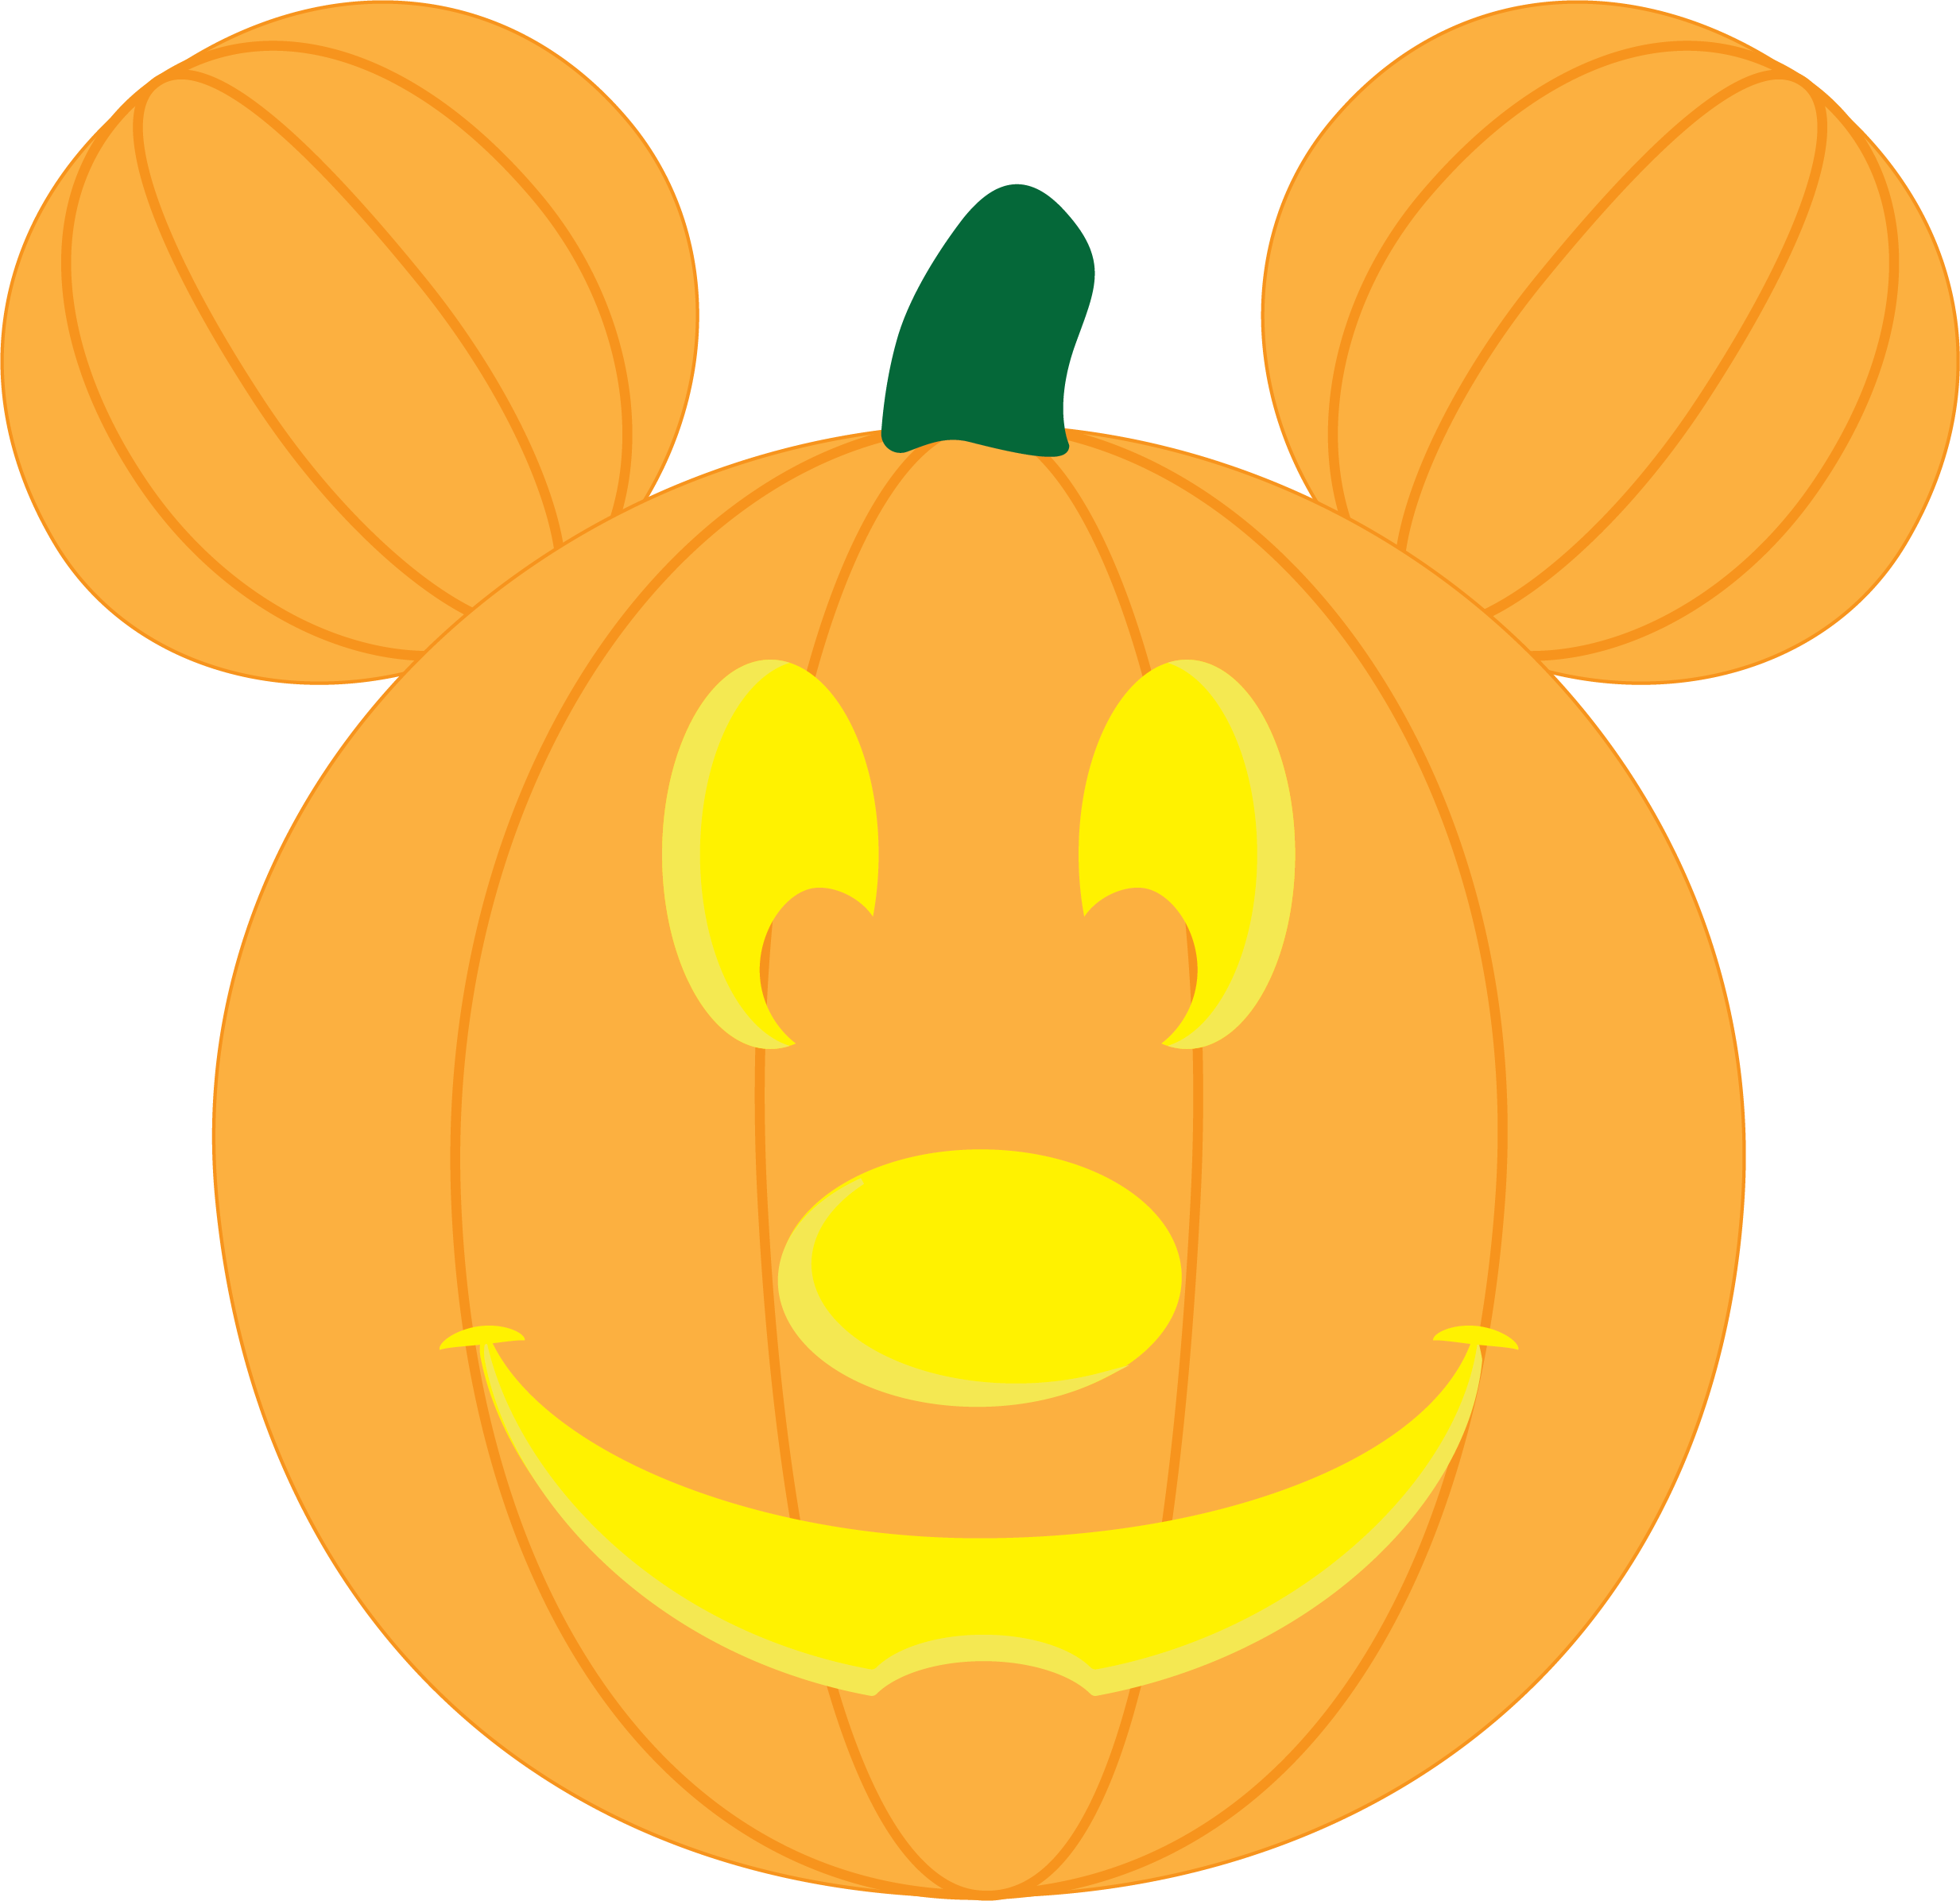 Mickey Mouse Pumpkin Carving Design